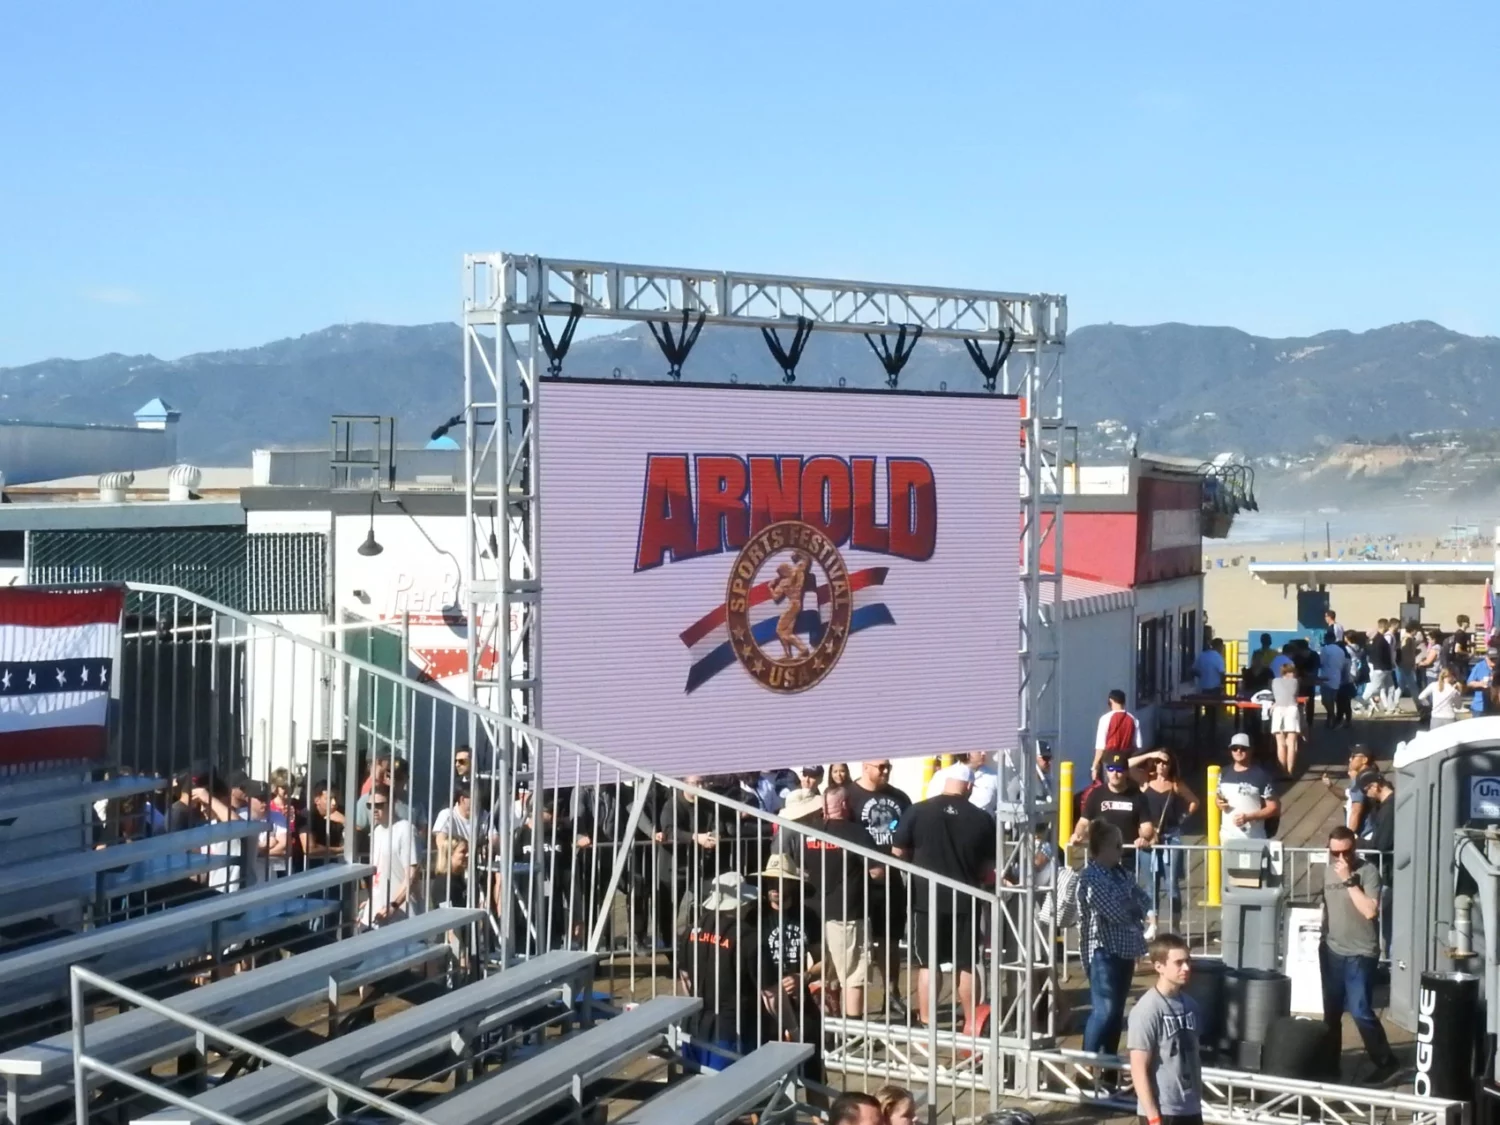 Image of LED Display at the Arnold Pro Strongman World series